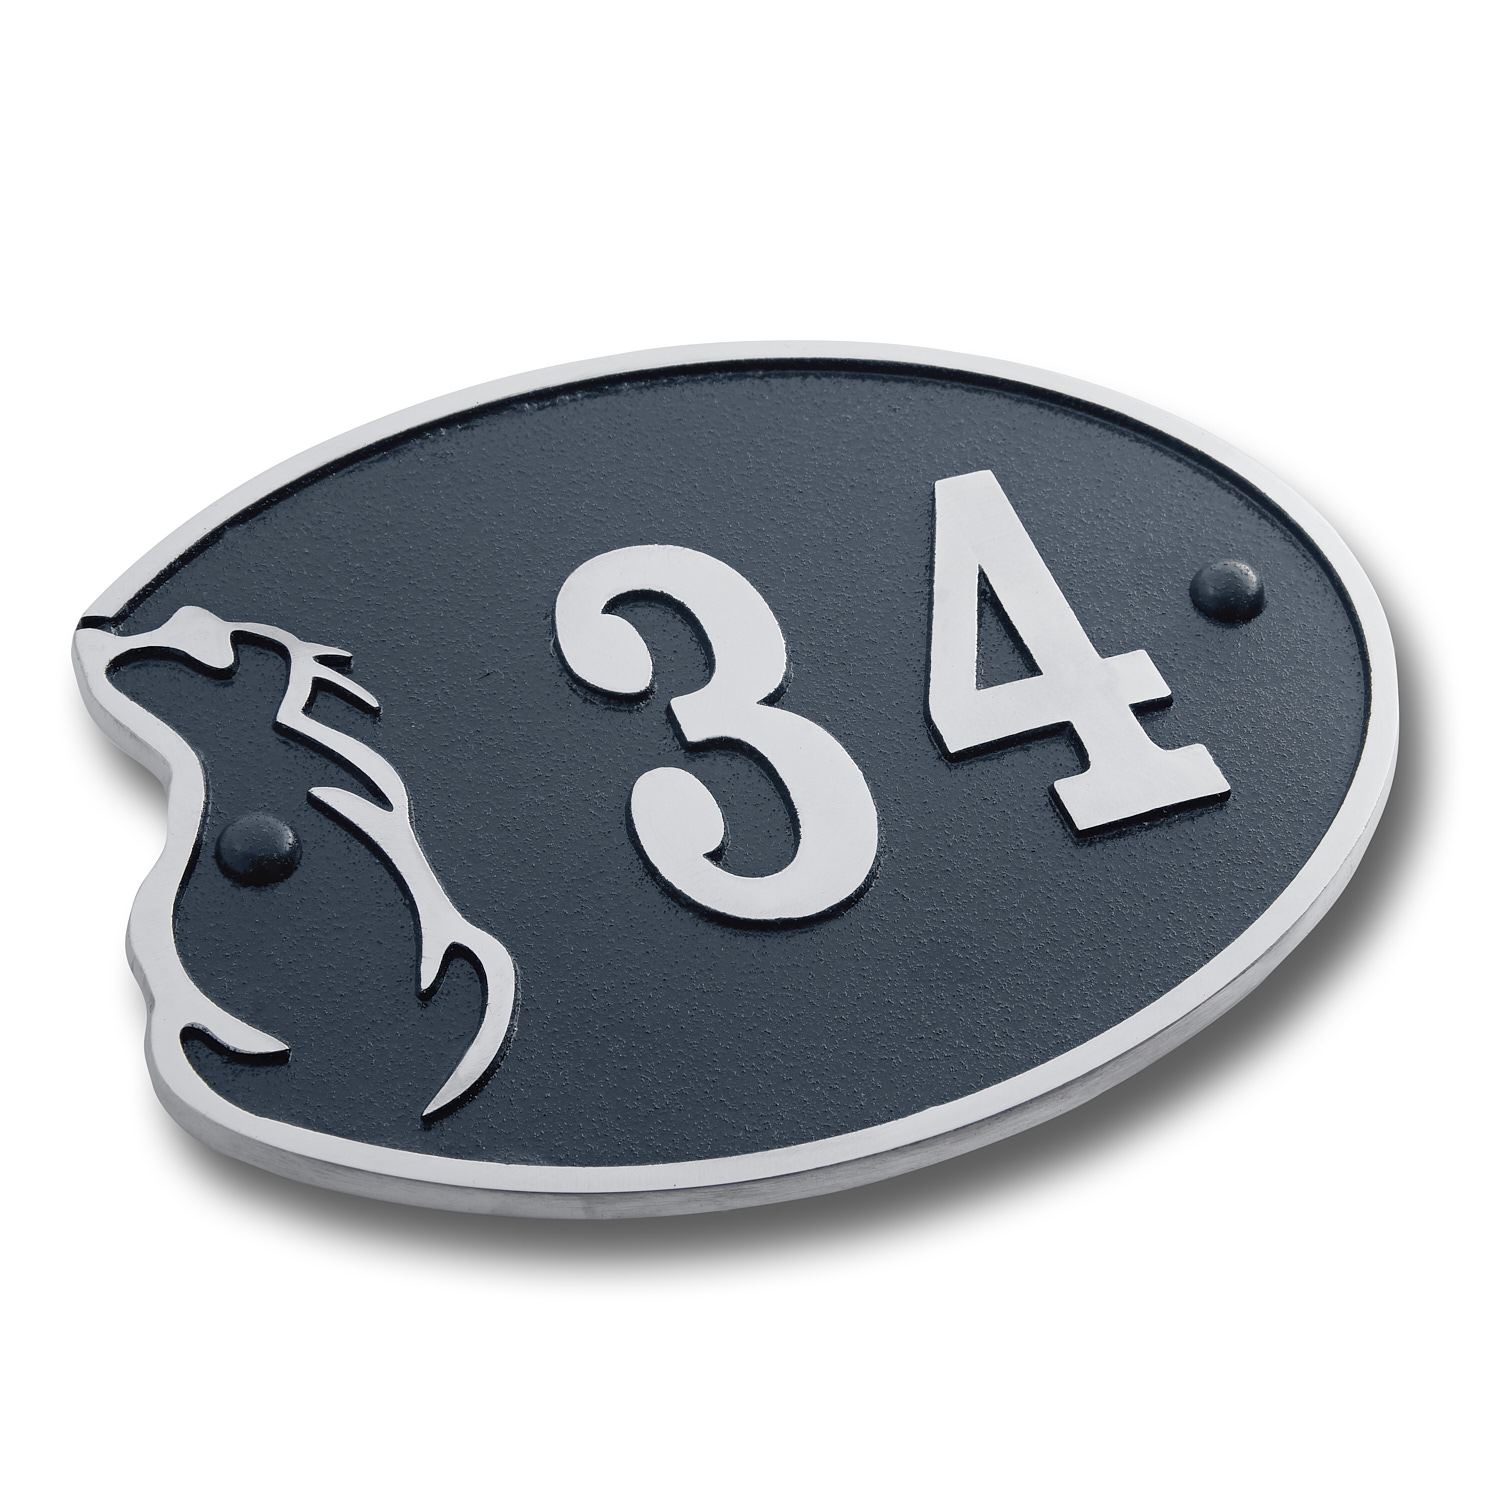 House Number Sign For Cat Lovers.  Cast Metal Personalised Home Or Mailbox Plaque With Oodles Of Colour, Number And Letter Options – Large Up To 5 Characters With Street/Family Name